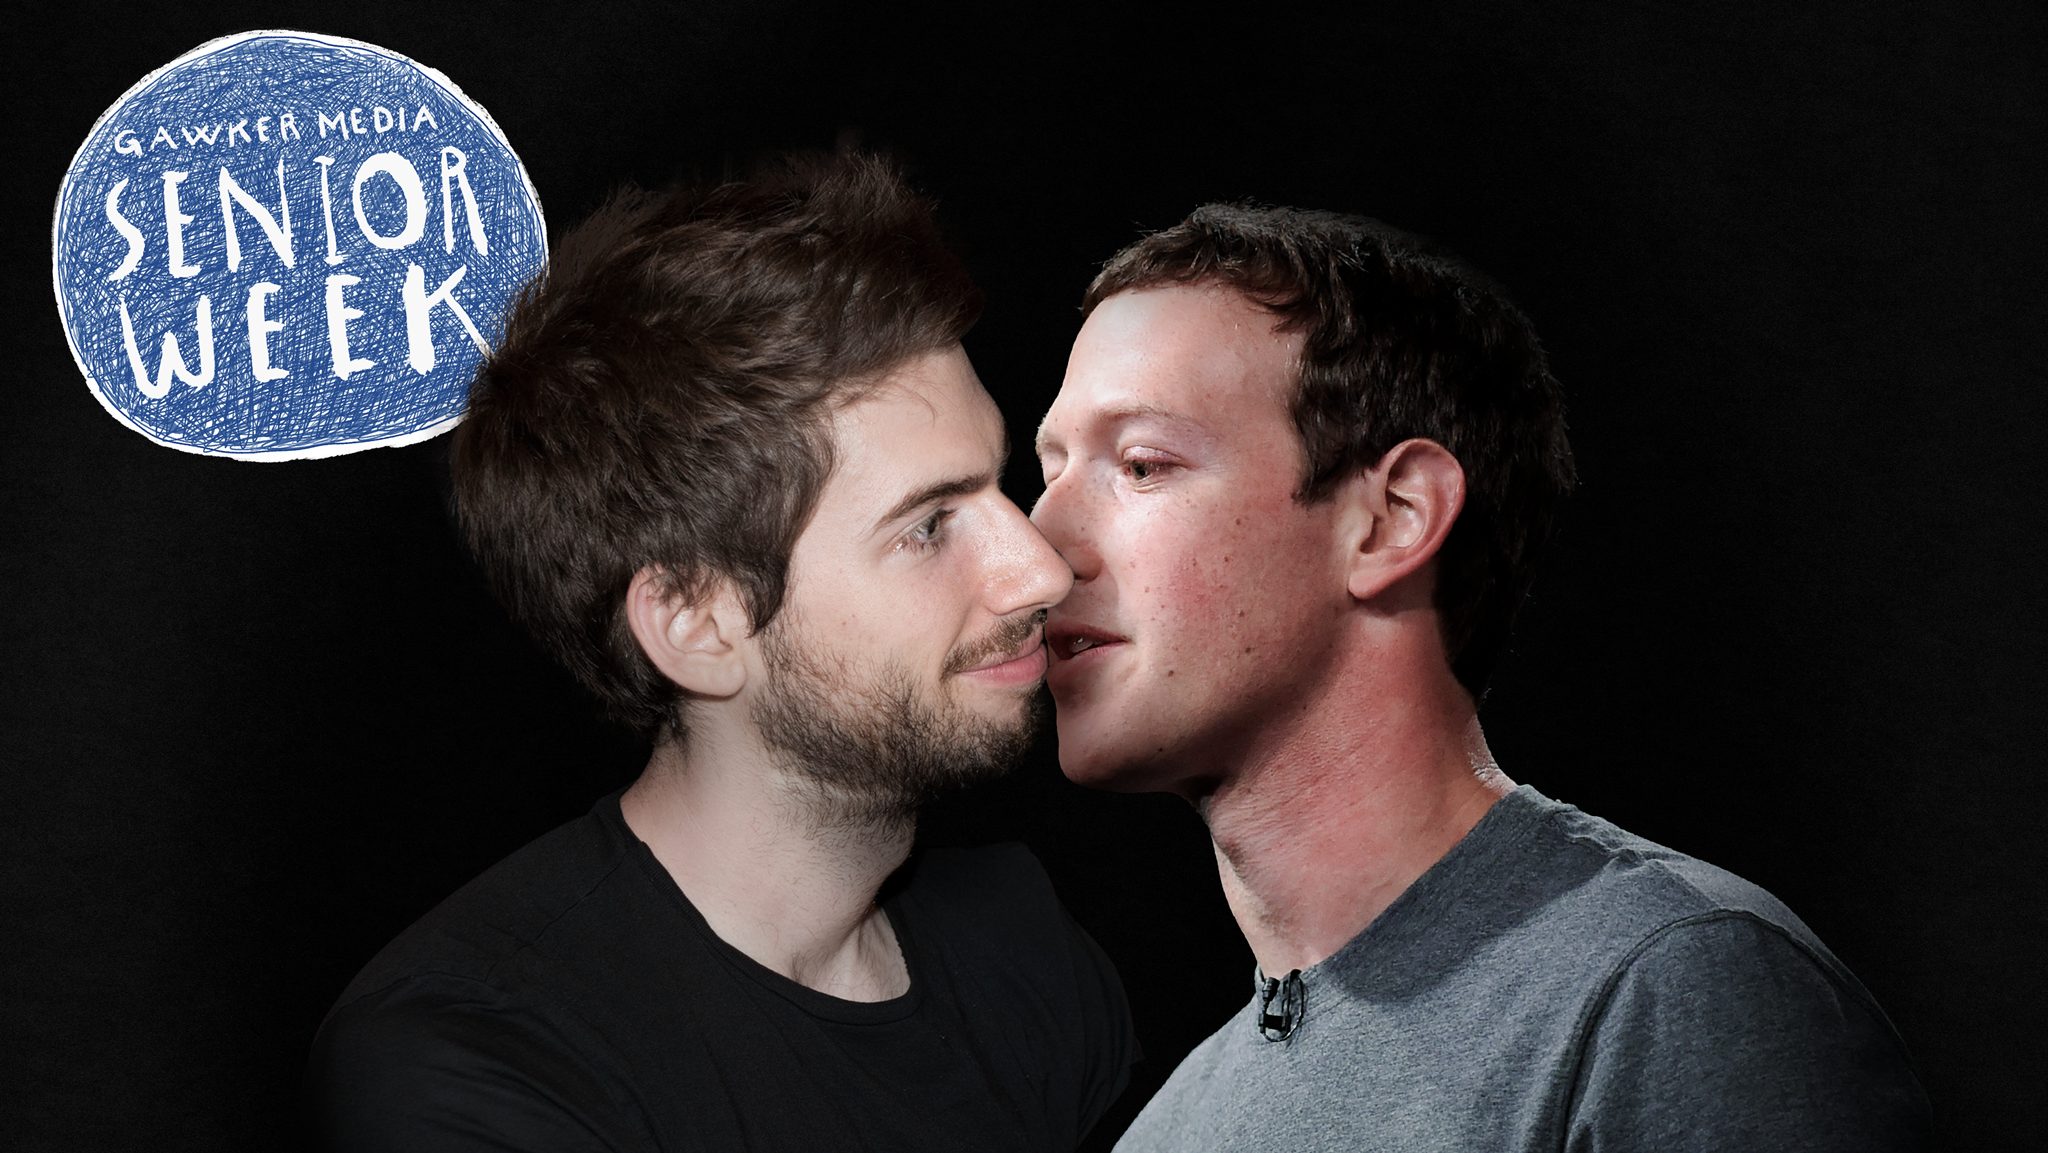 The Best Erotic Fanfiction Involving Our Tech Overlord Billionaires [very Nsfw]